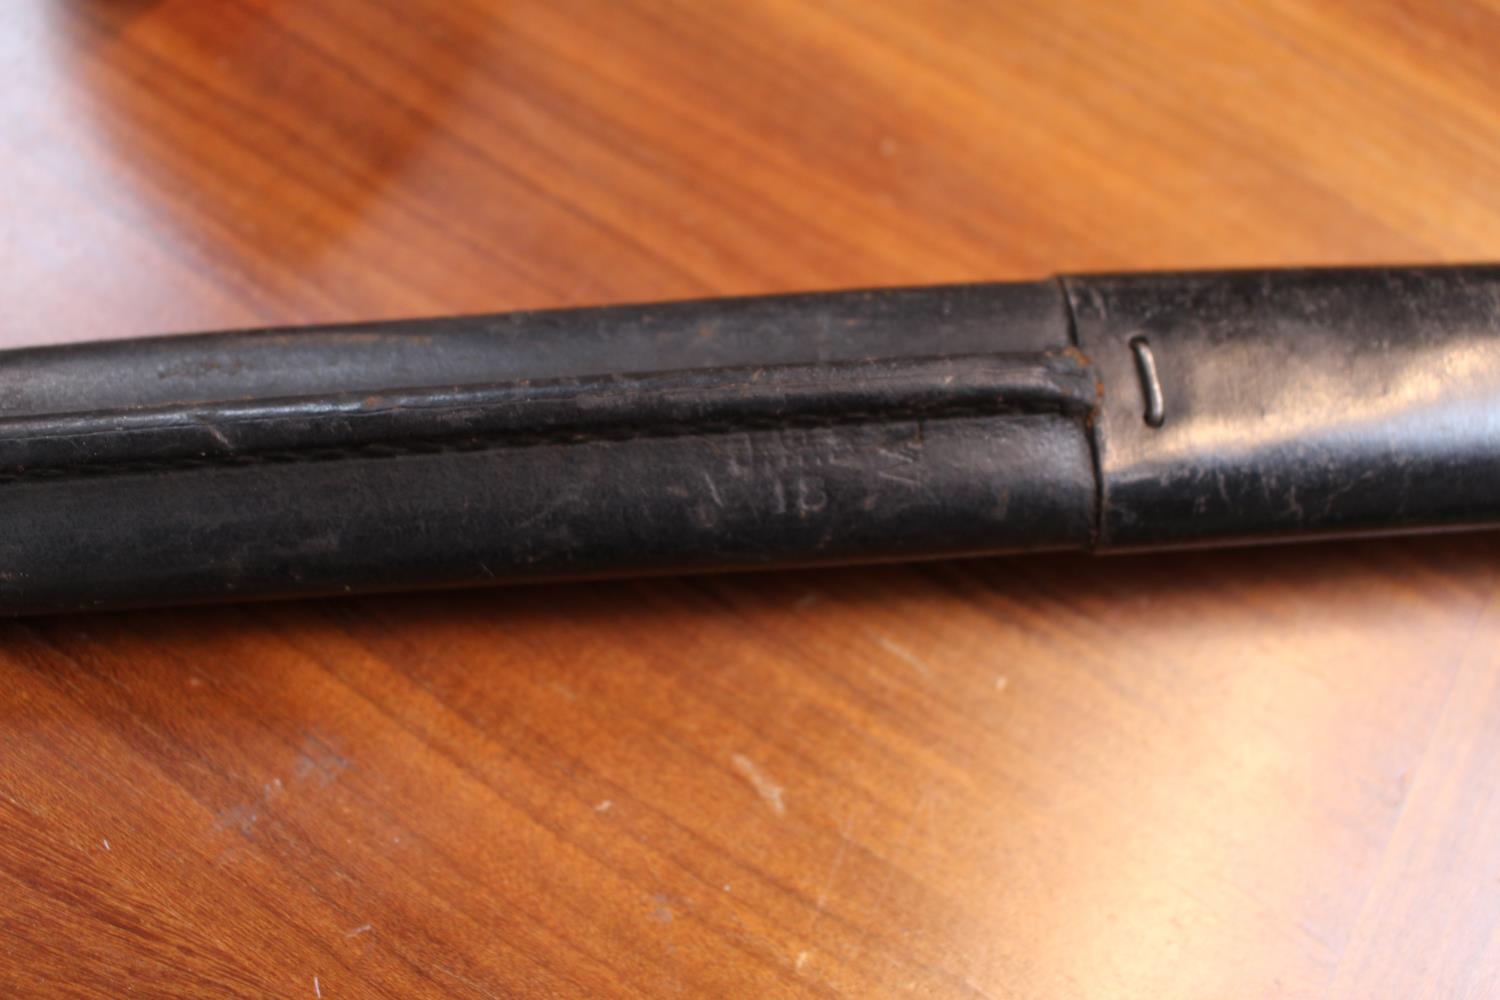 Anderson WW1 bayonet and scabbard dated 1907 with almost all original finish remaining - Image 4 of 4